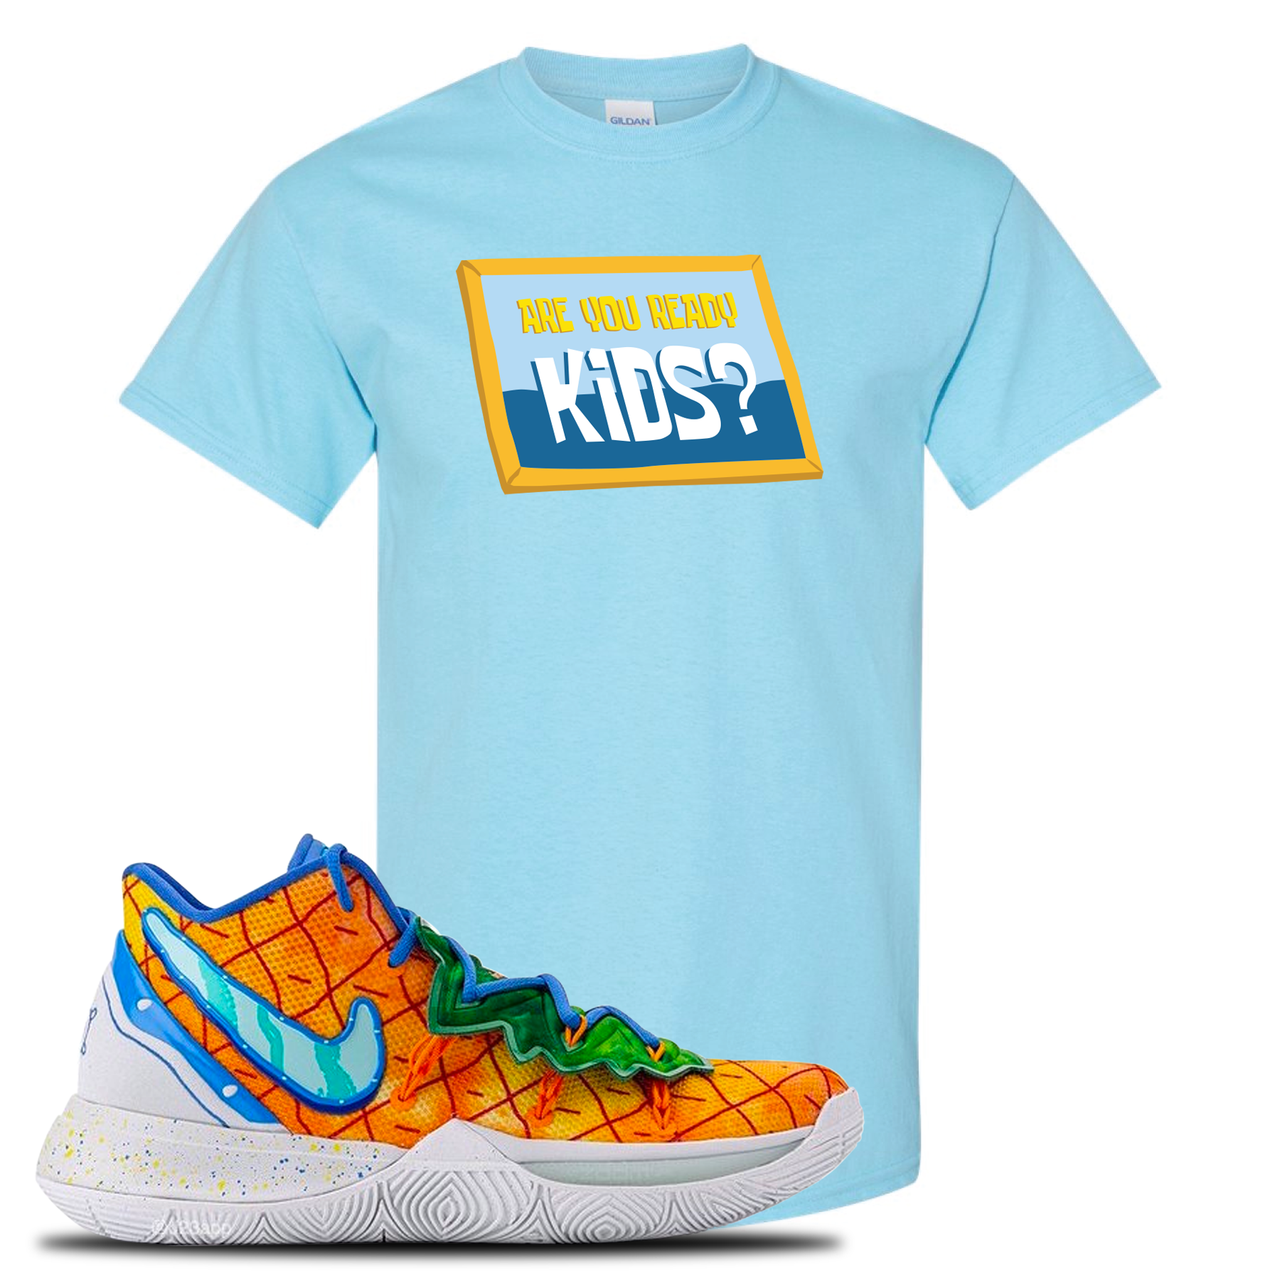 Kyrie 5 Pineapple House Are You Ready Kids? Sky Blue Sneaker Hook Up T-Shirt